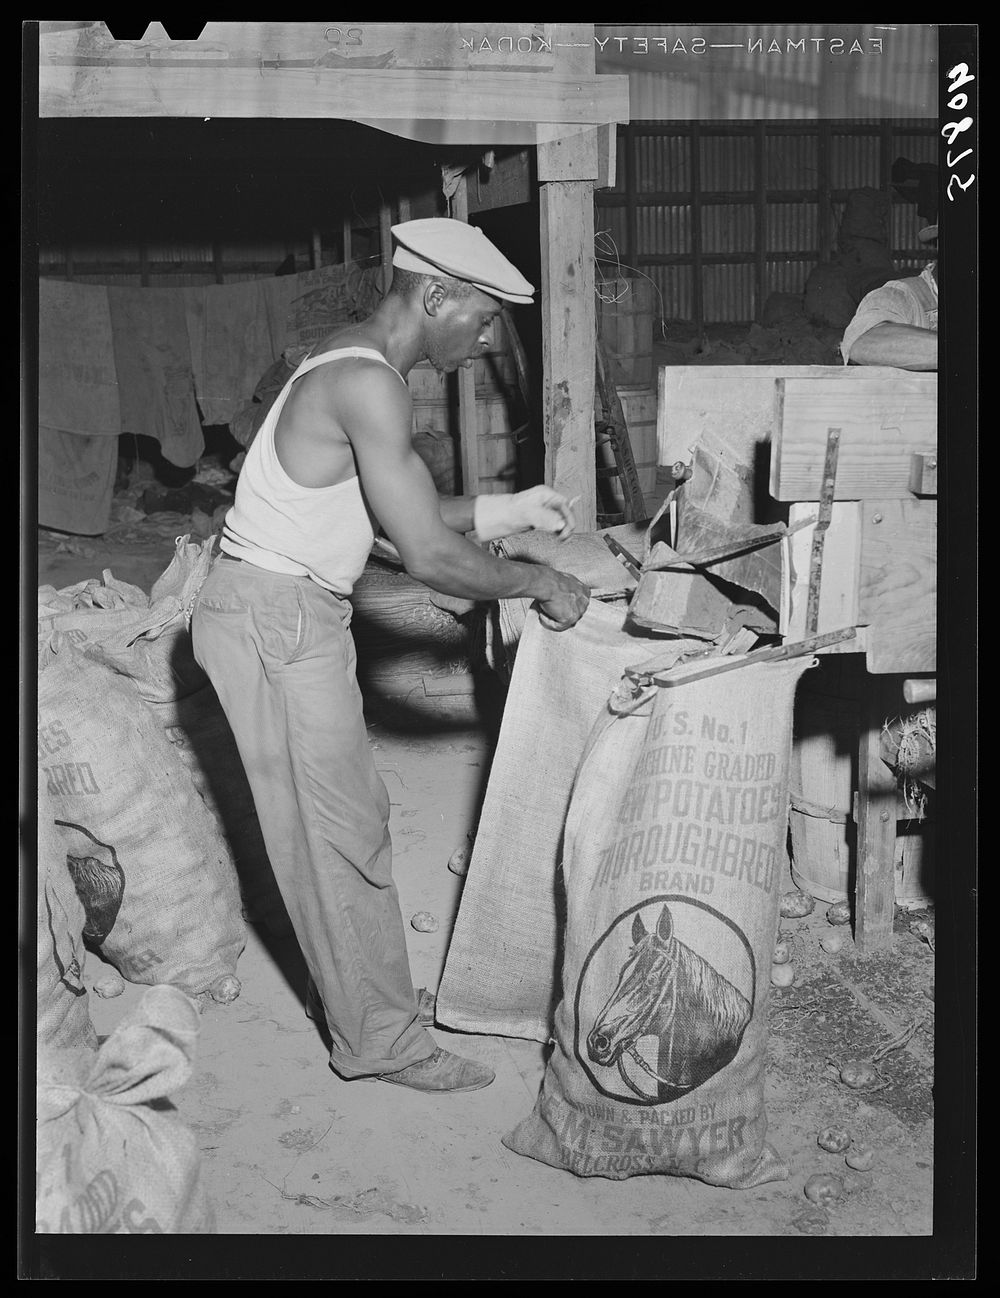 Migratory worker at the "number one" end of the grader at Belcross, North Carolina. Sourced from the Library of Congress.